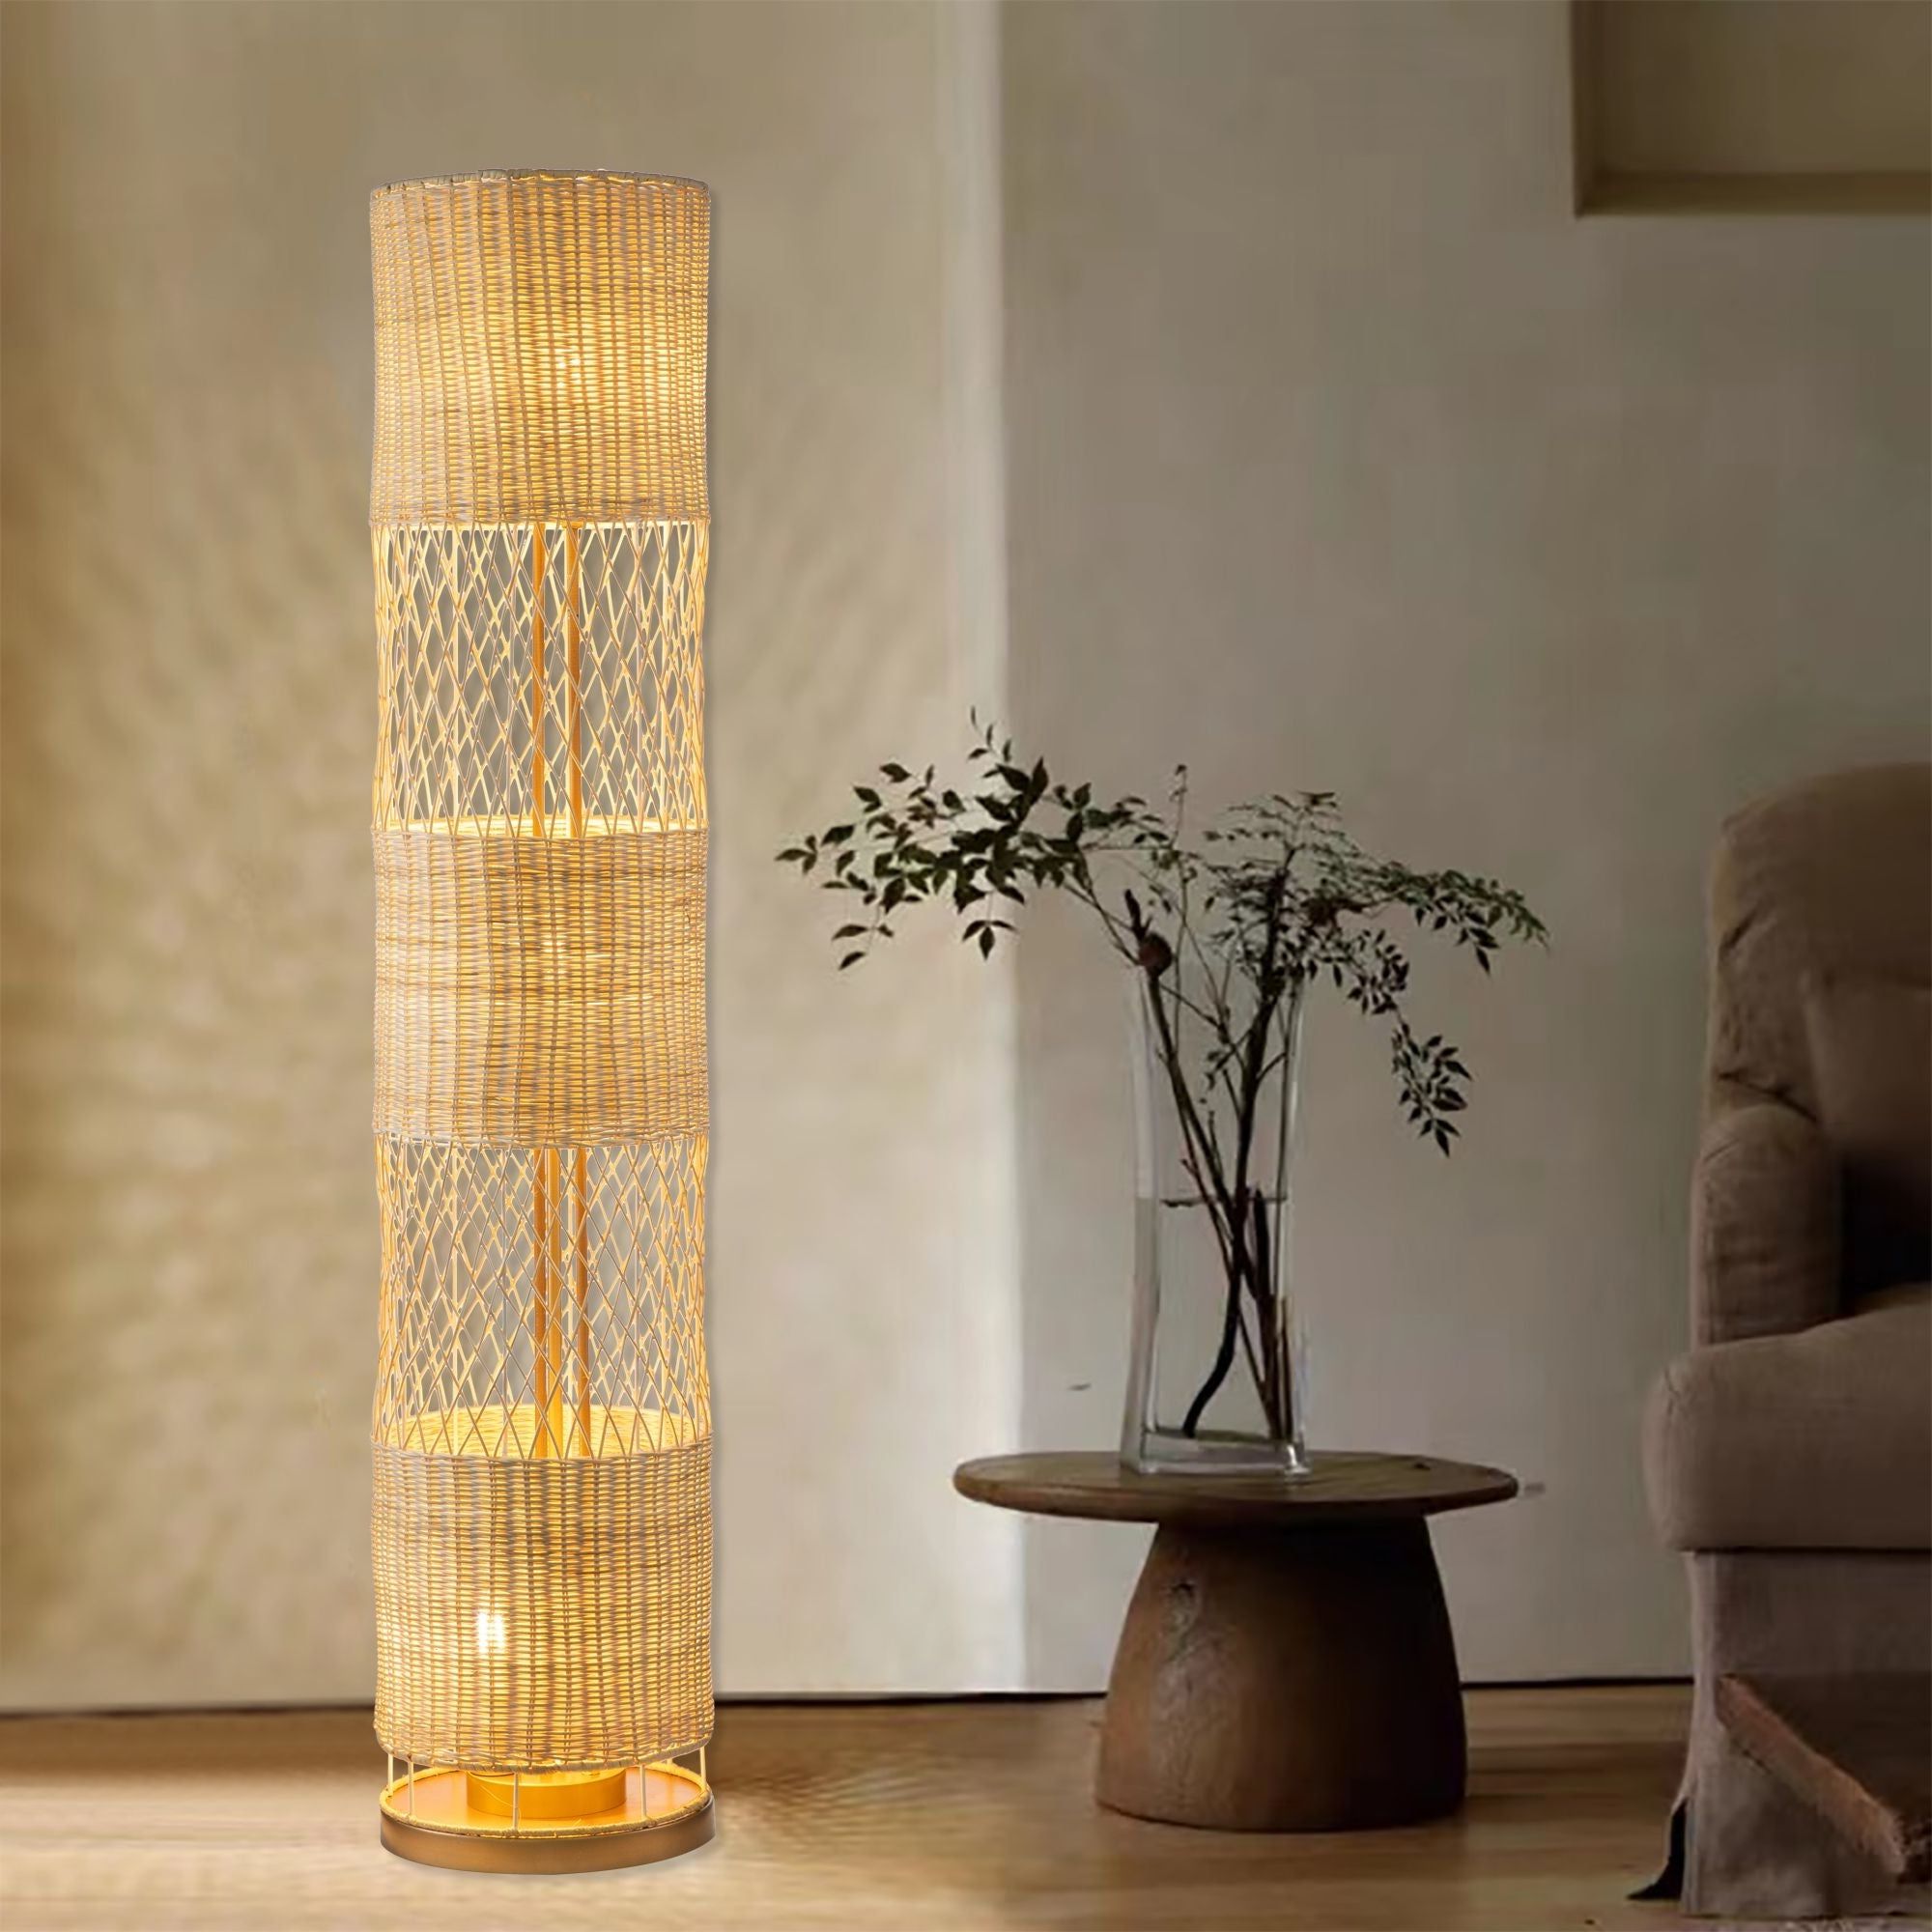 3 Lights Rattan Unique Floor Lamp – Overstock – 34811407 Intended For Most Popular Rattan Standing Lamps (View 5 of 10)